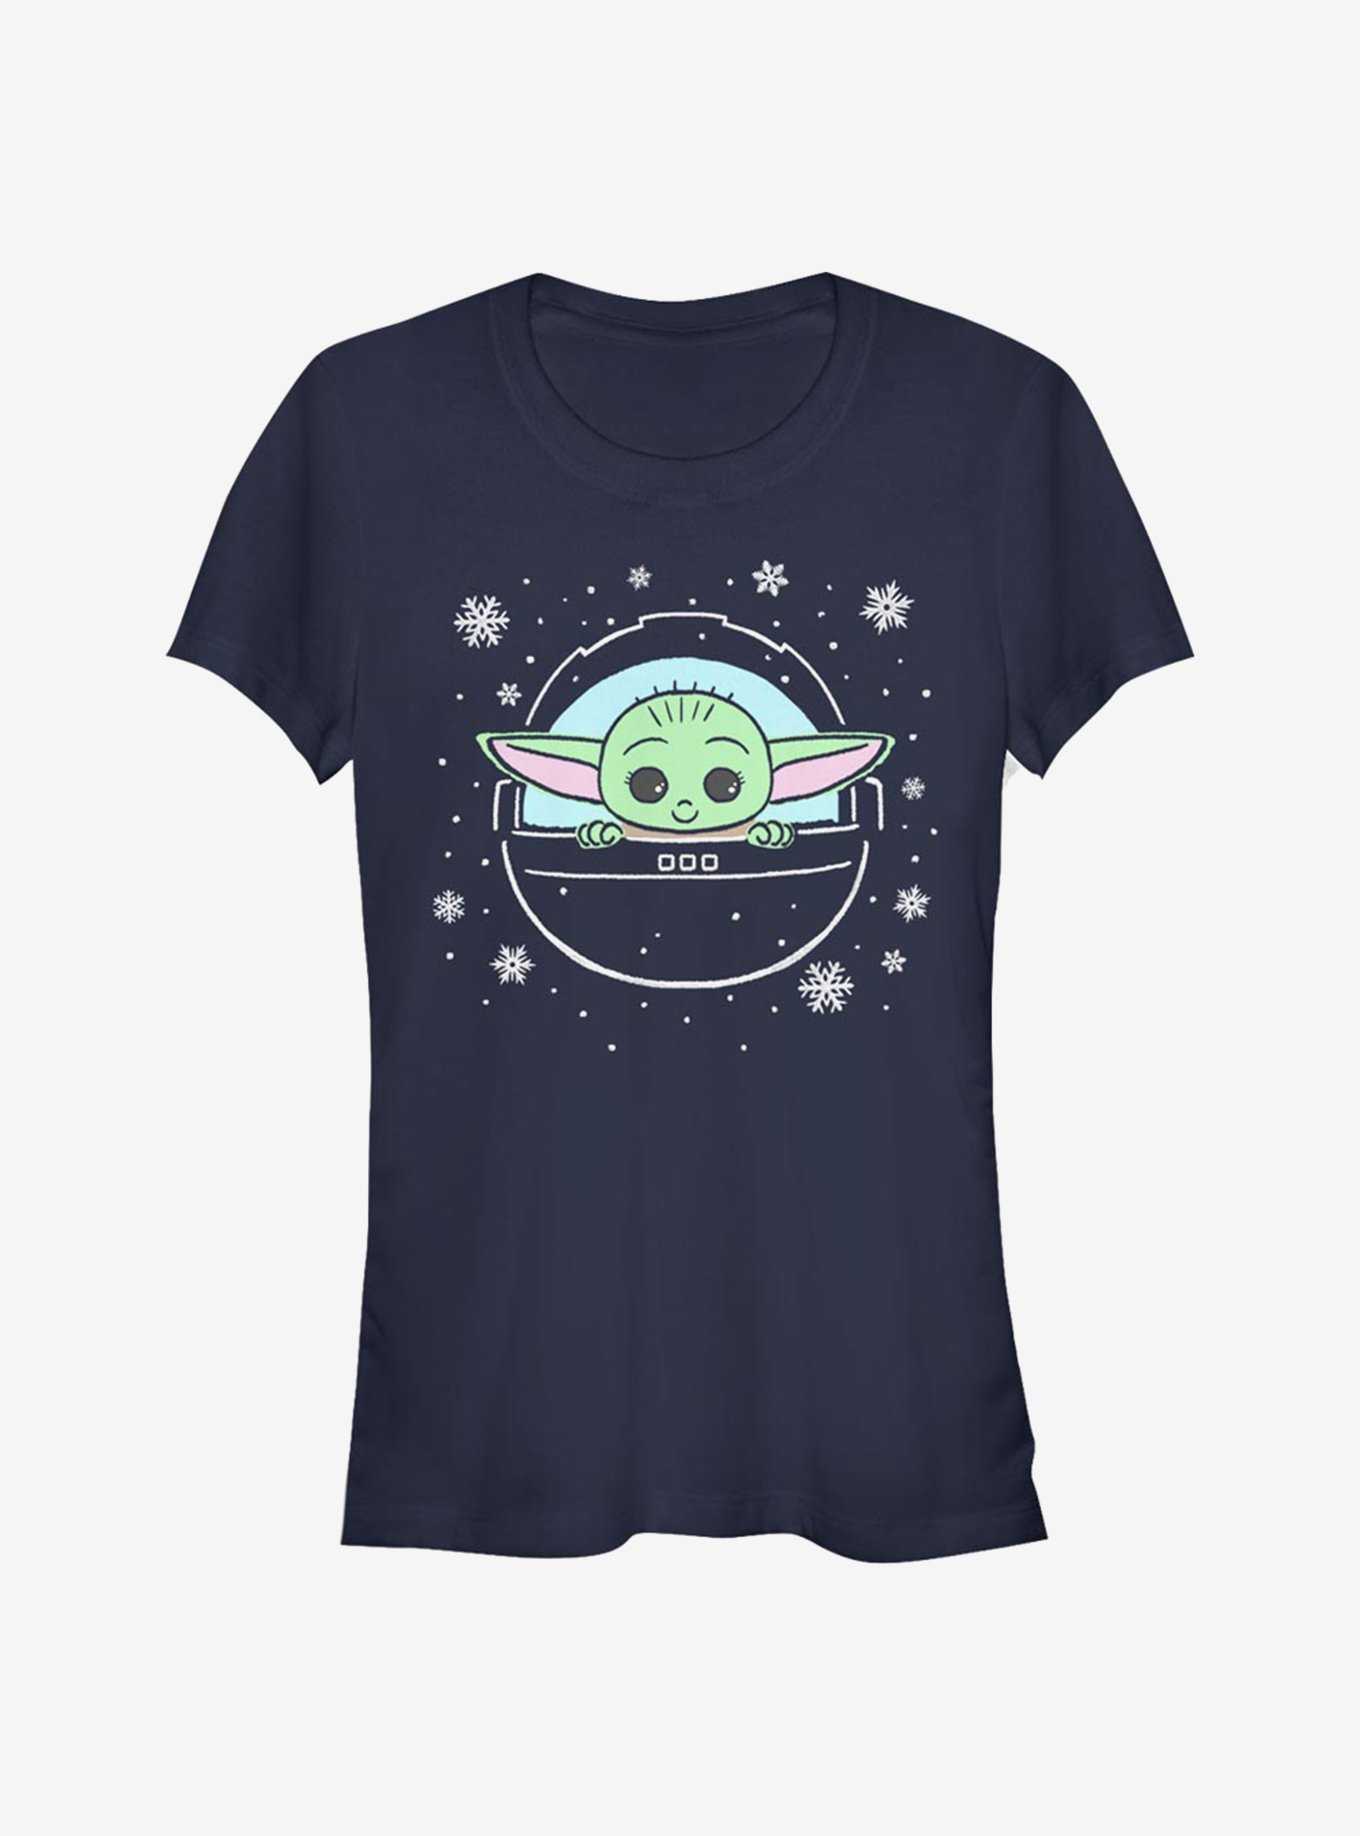 Star Wars The Mandalorian The Child Loves The Snow Girls T-Shirt, , hi-res